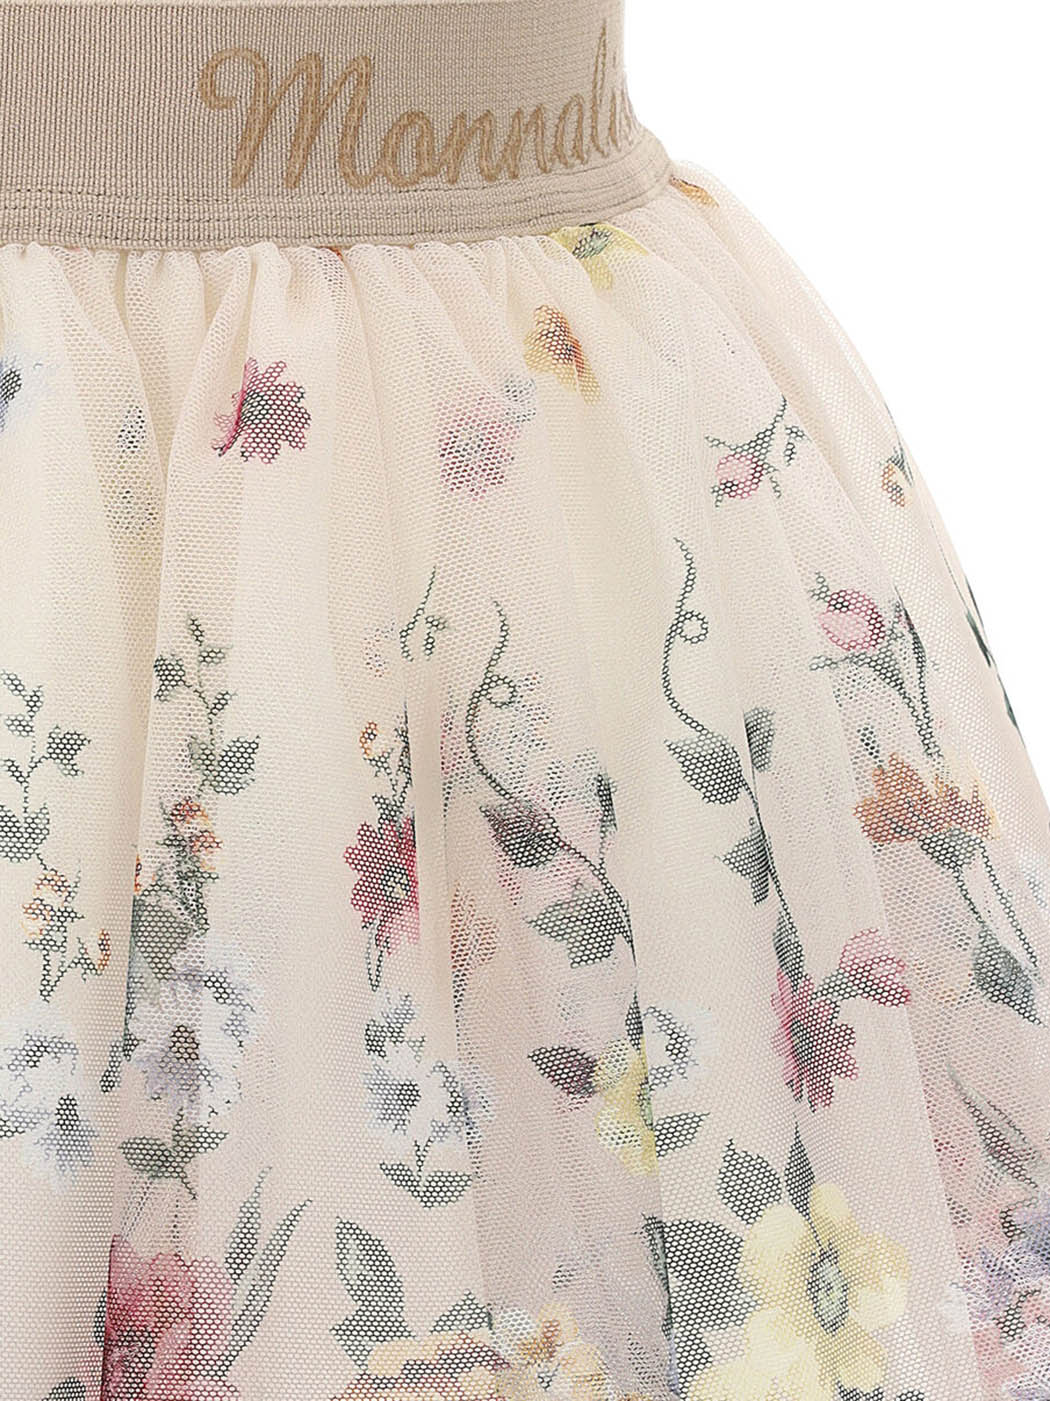 MONNALISA Floral tulle skirt with logo